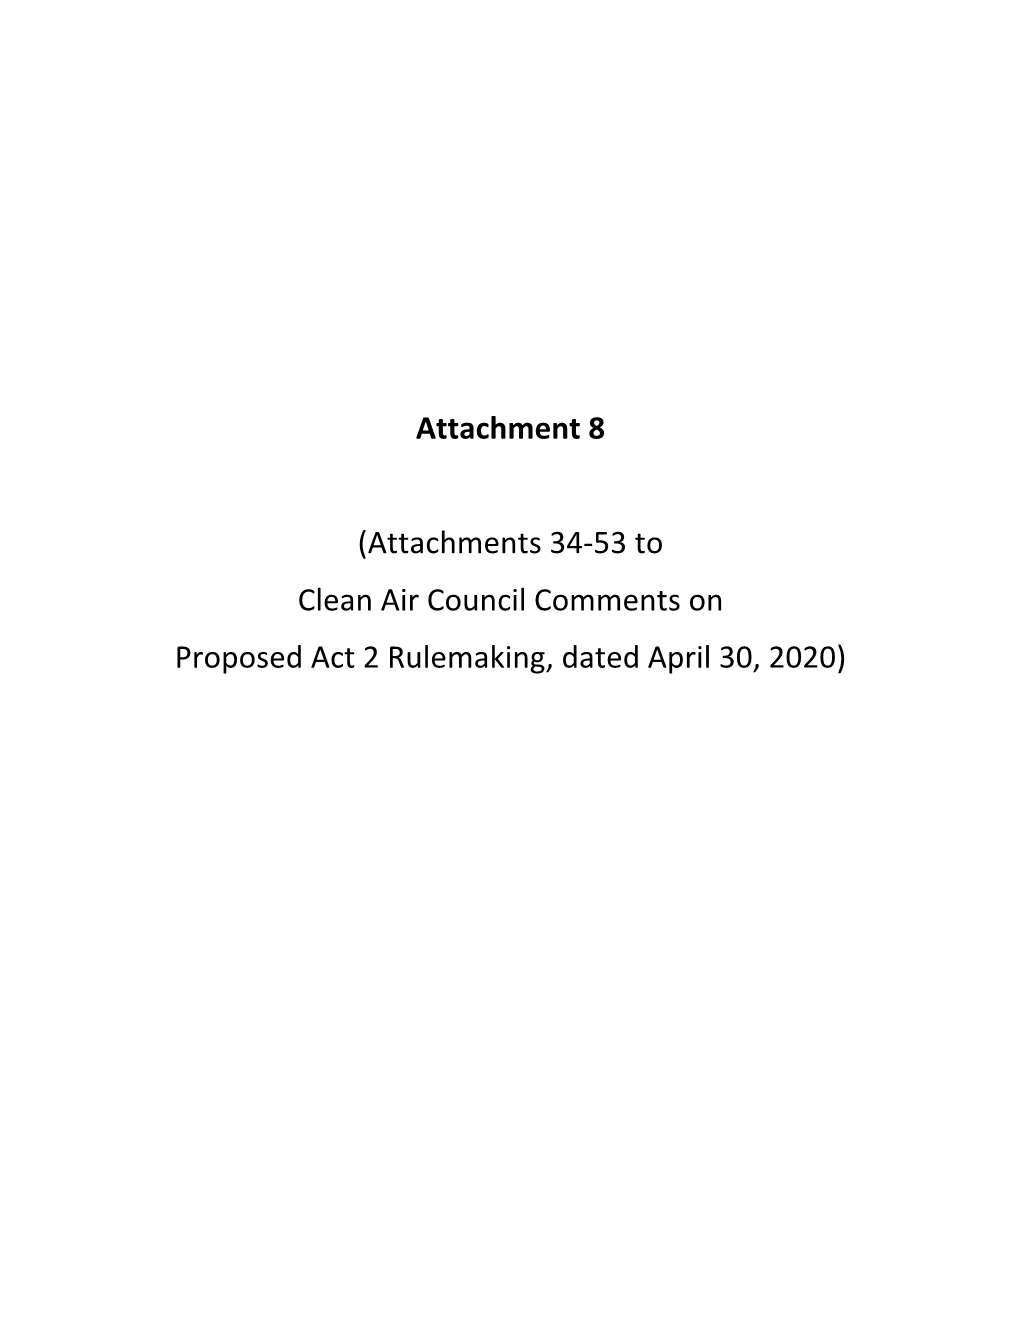 Attachment 8 (Attachments 34-53 to Clean Air Council Comments On